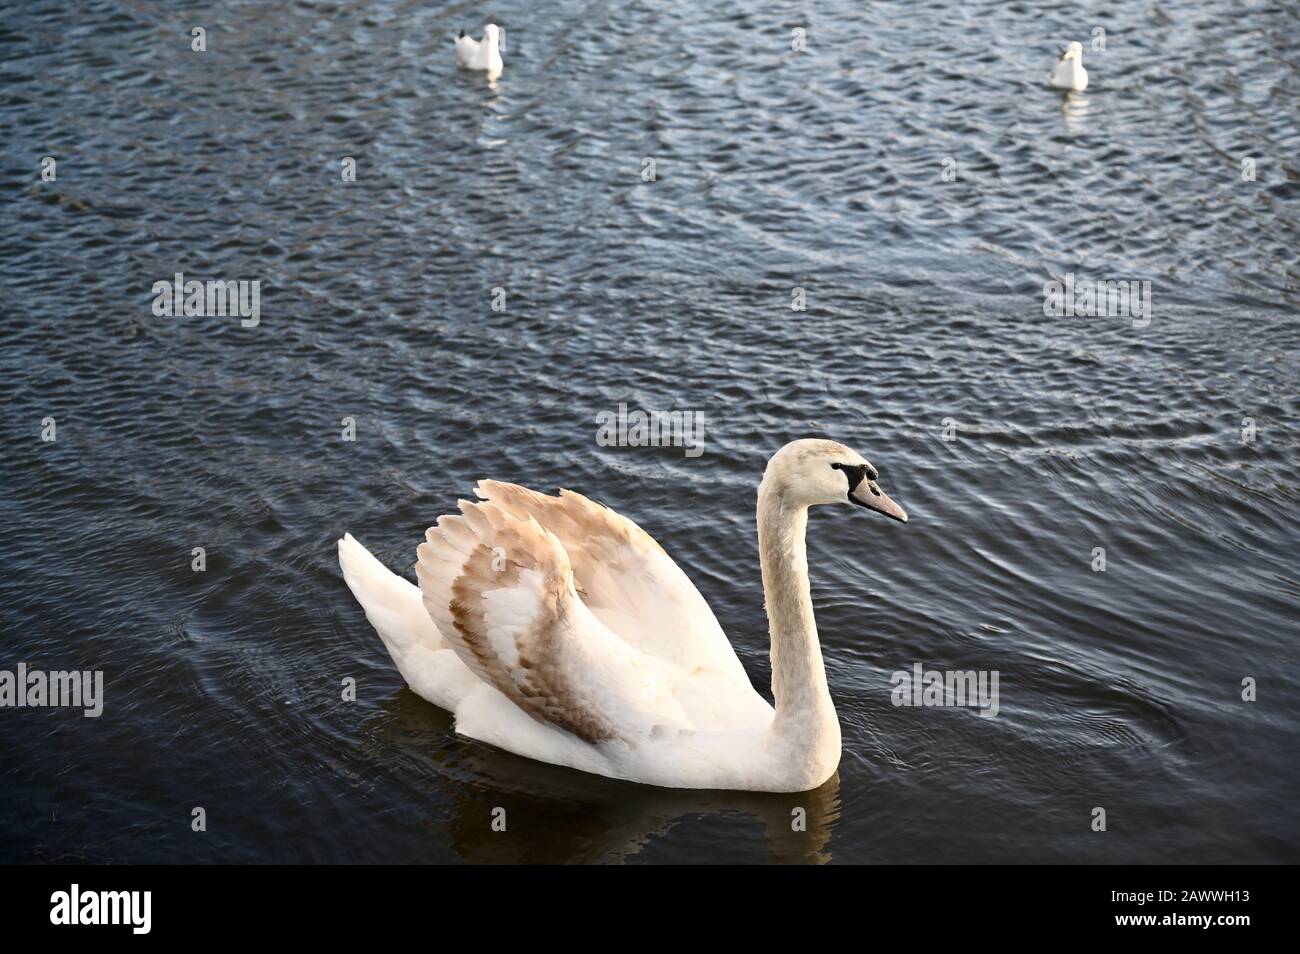 Cygnet Cygne. Racines Cray Meadows, Sidcup, Kent. ROYAUME-UNI Banque D'Images